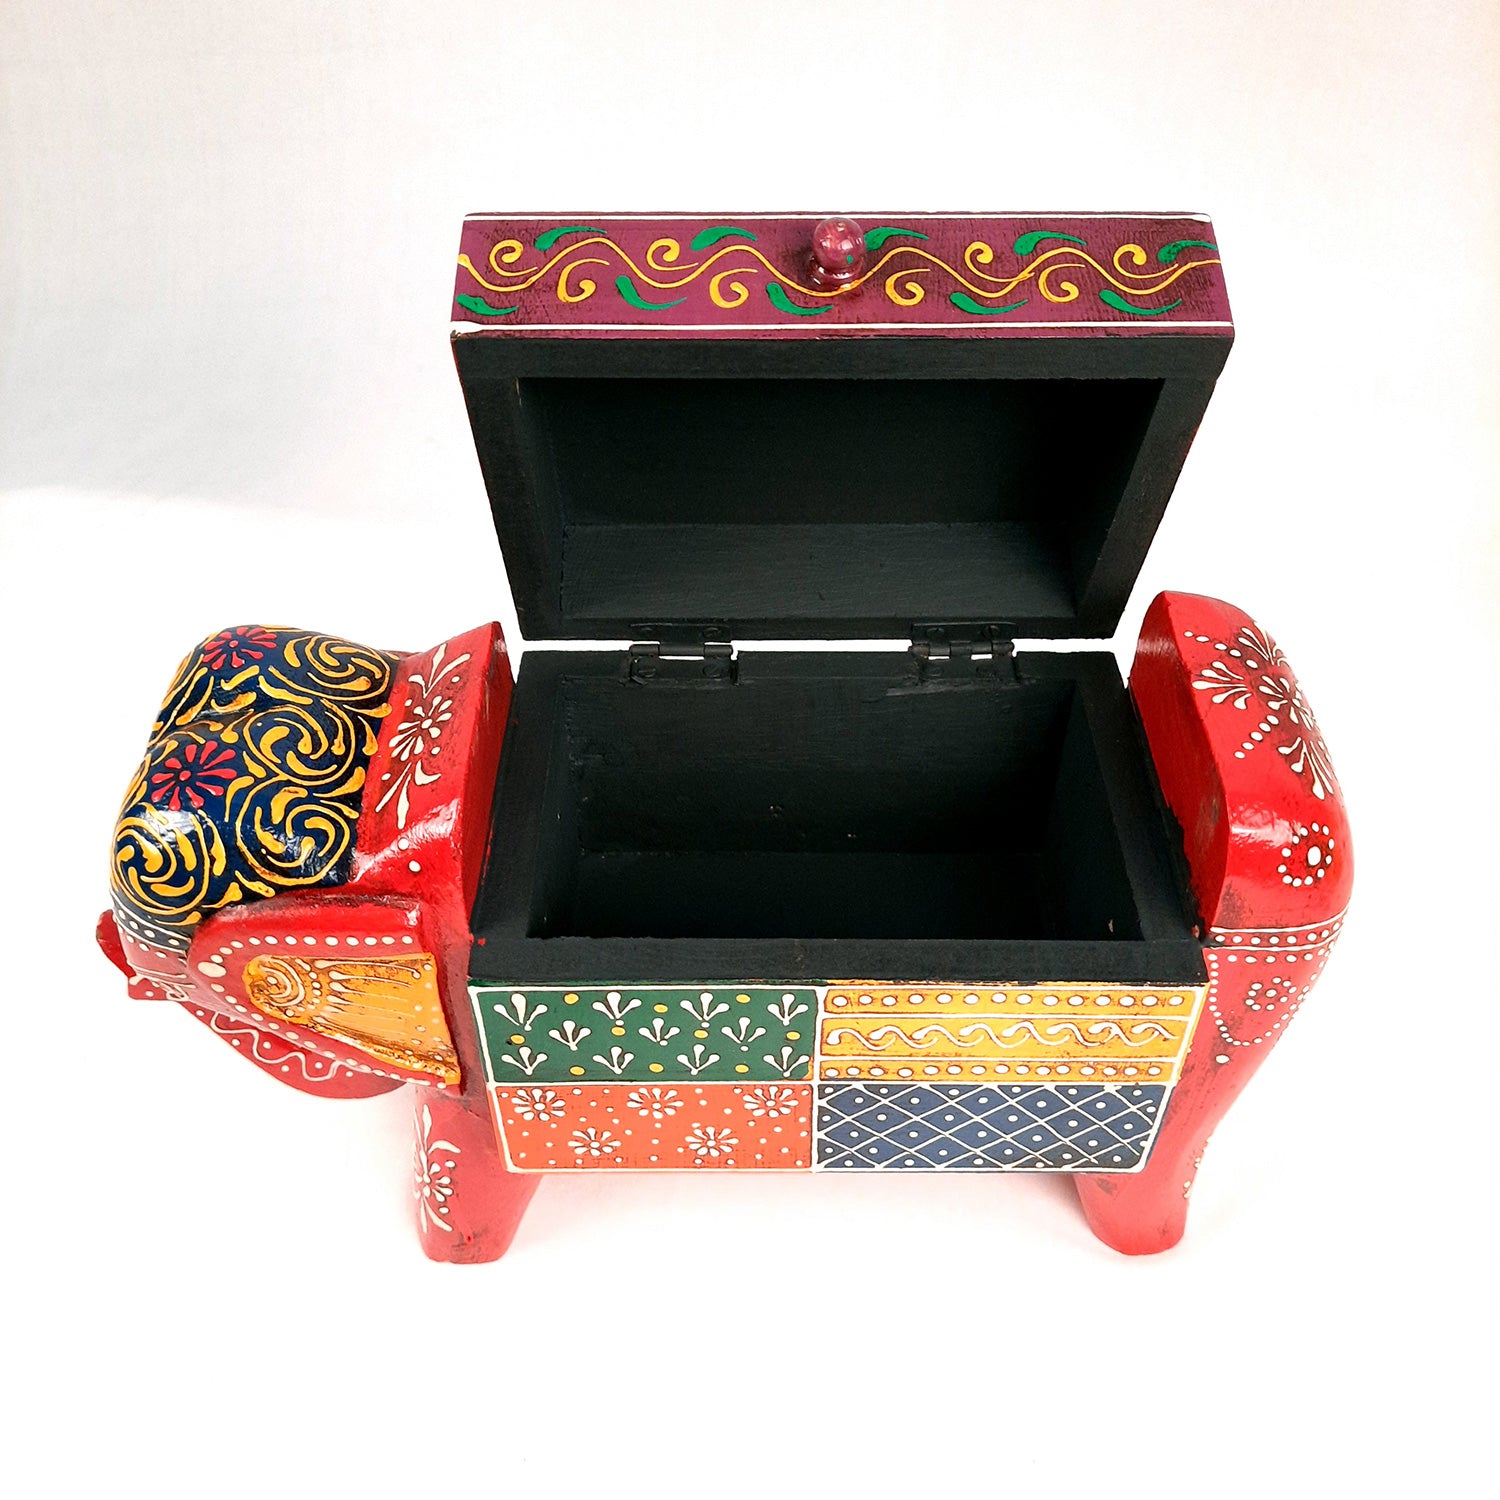 Jewellery Box - Elephant Design | Decorative Wooden Jewelry Box - For Earring, Necklace & Gifts - 11 Inch